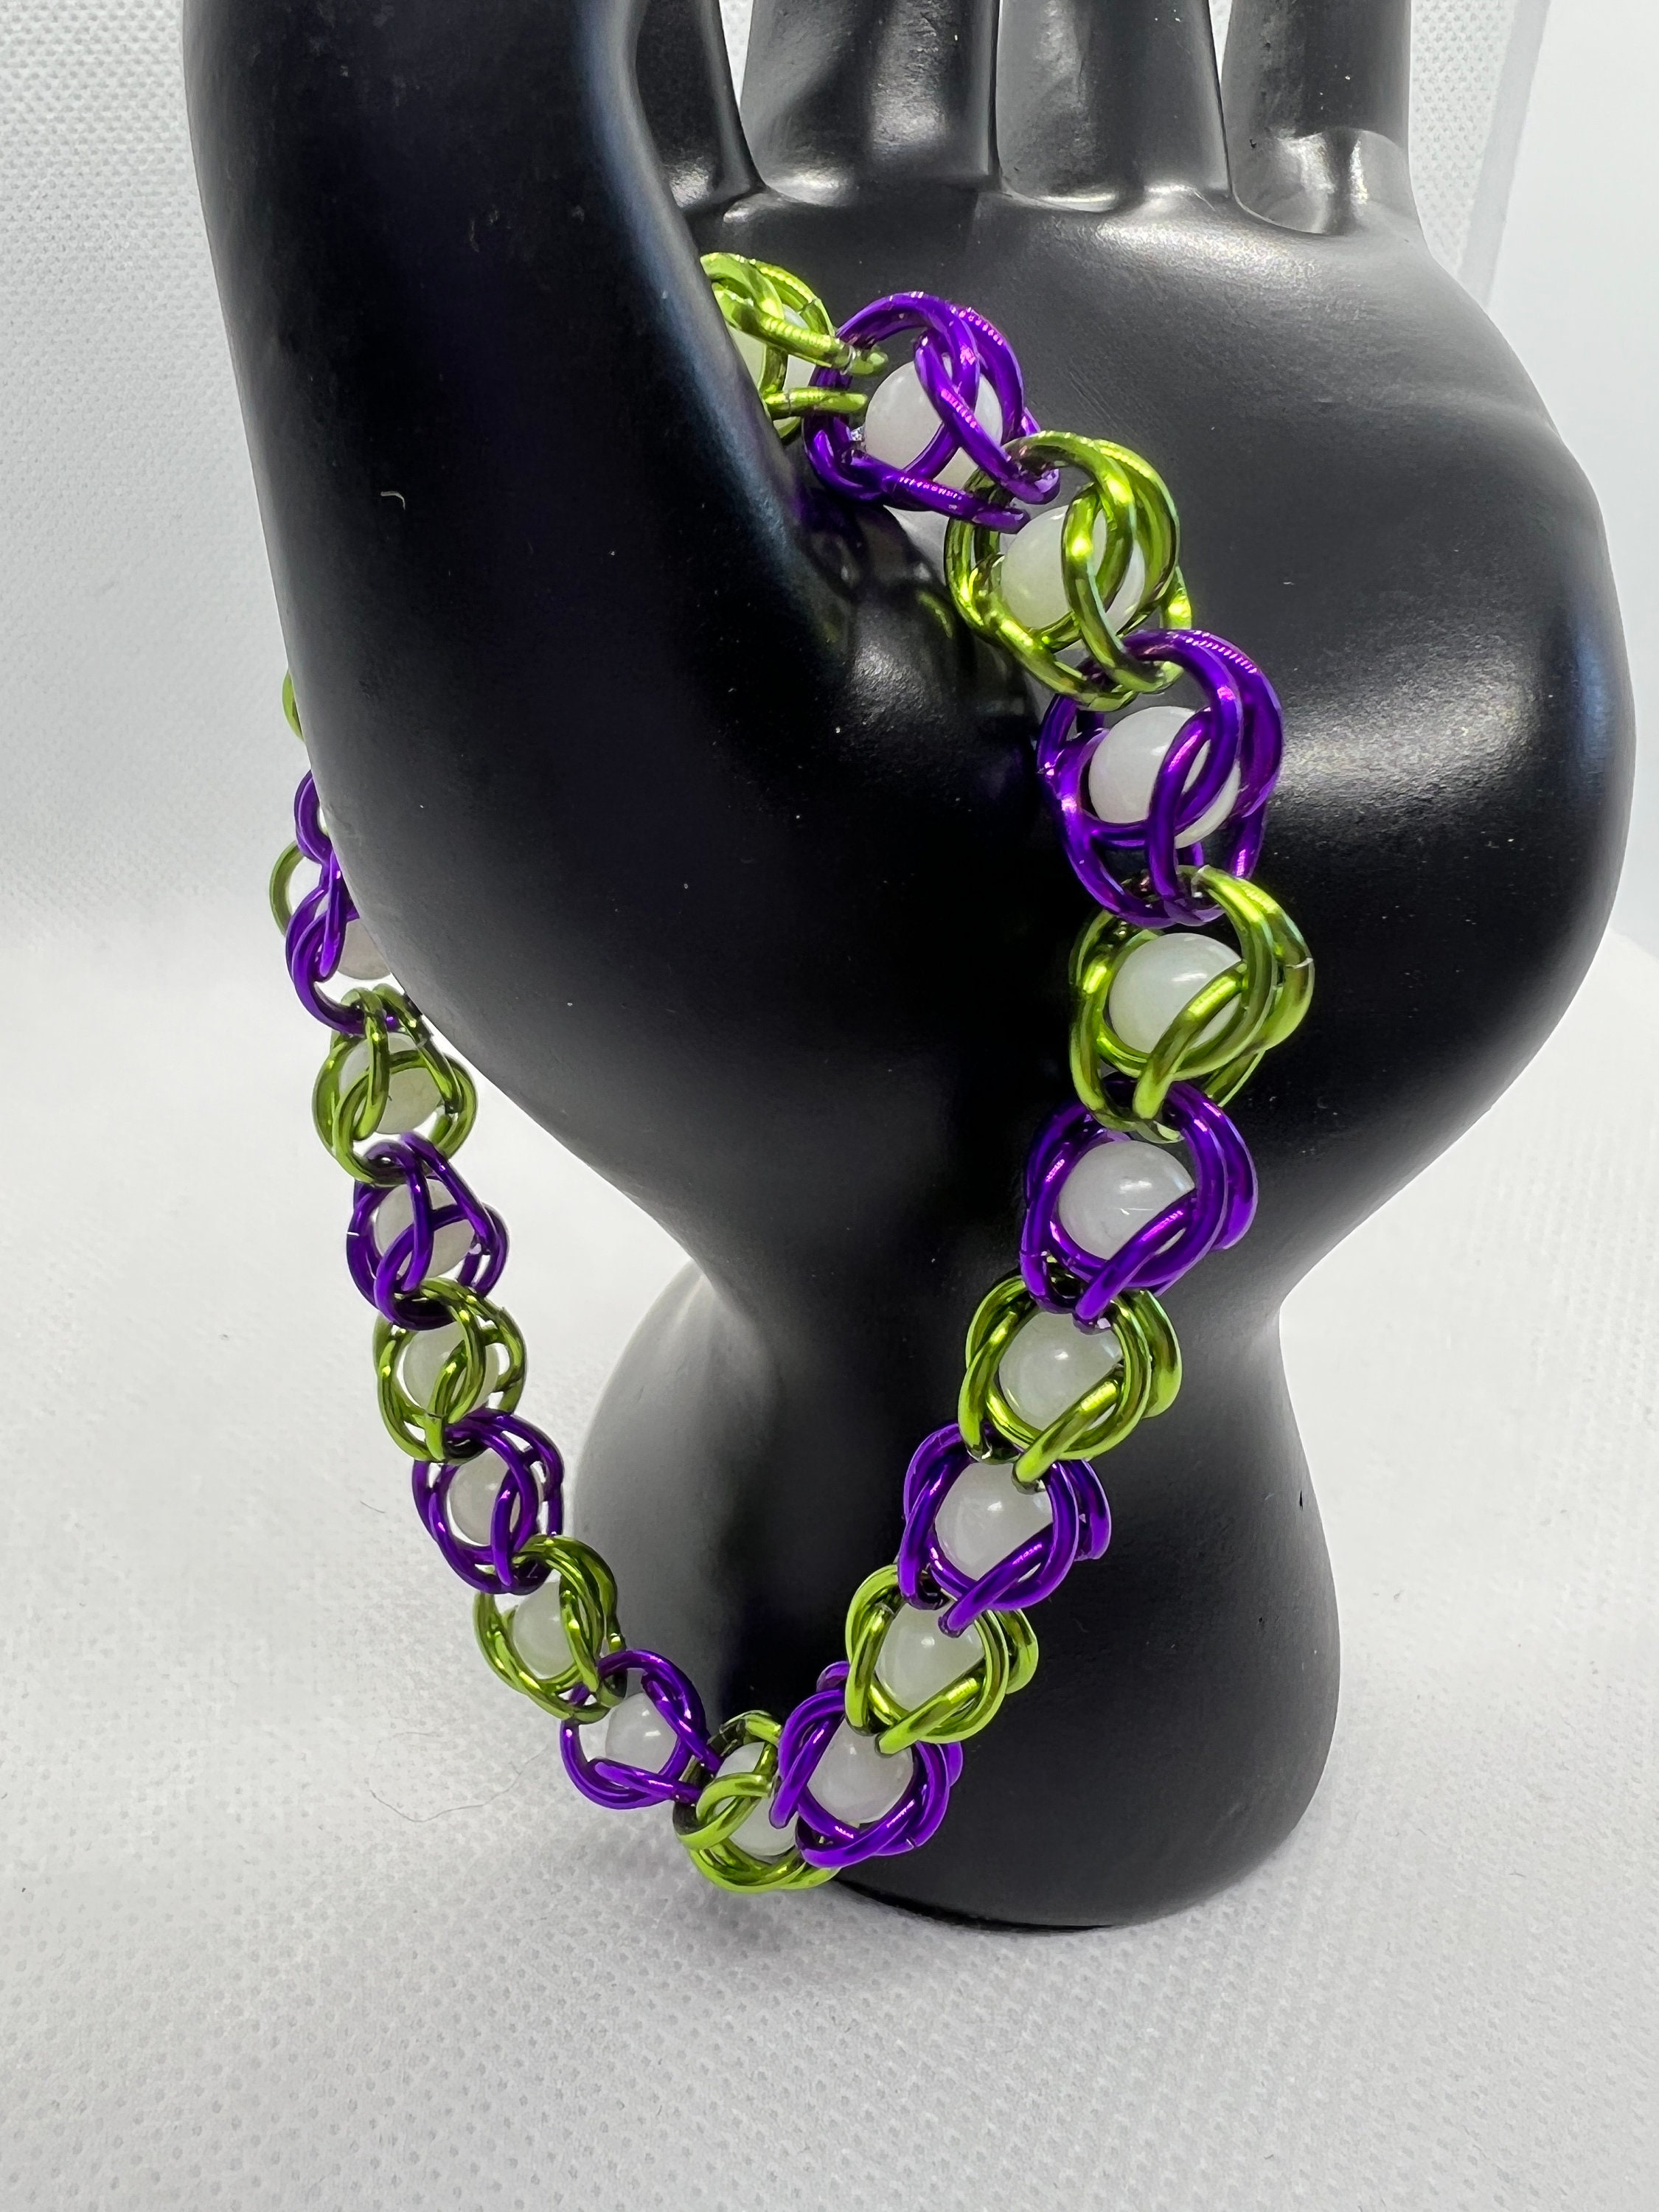 Green Captured Glow in the Dark Bead Bracelet Niobium Hook Clasp Adjustable 7-8.5 Long Chainmaille Blue Anodized Aluminum Rings Purple